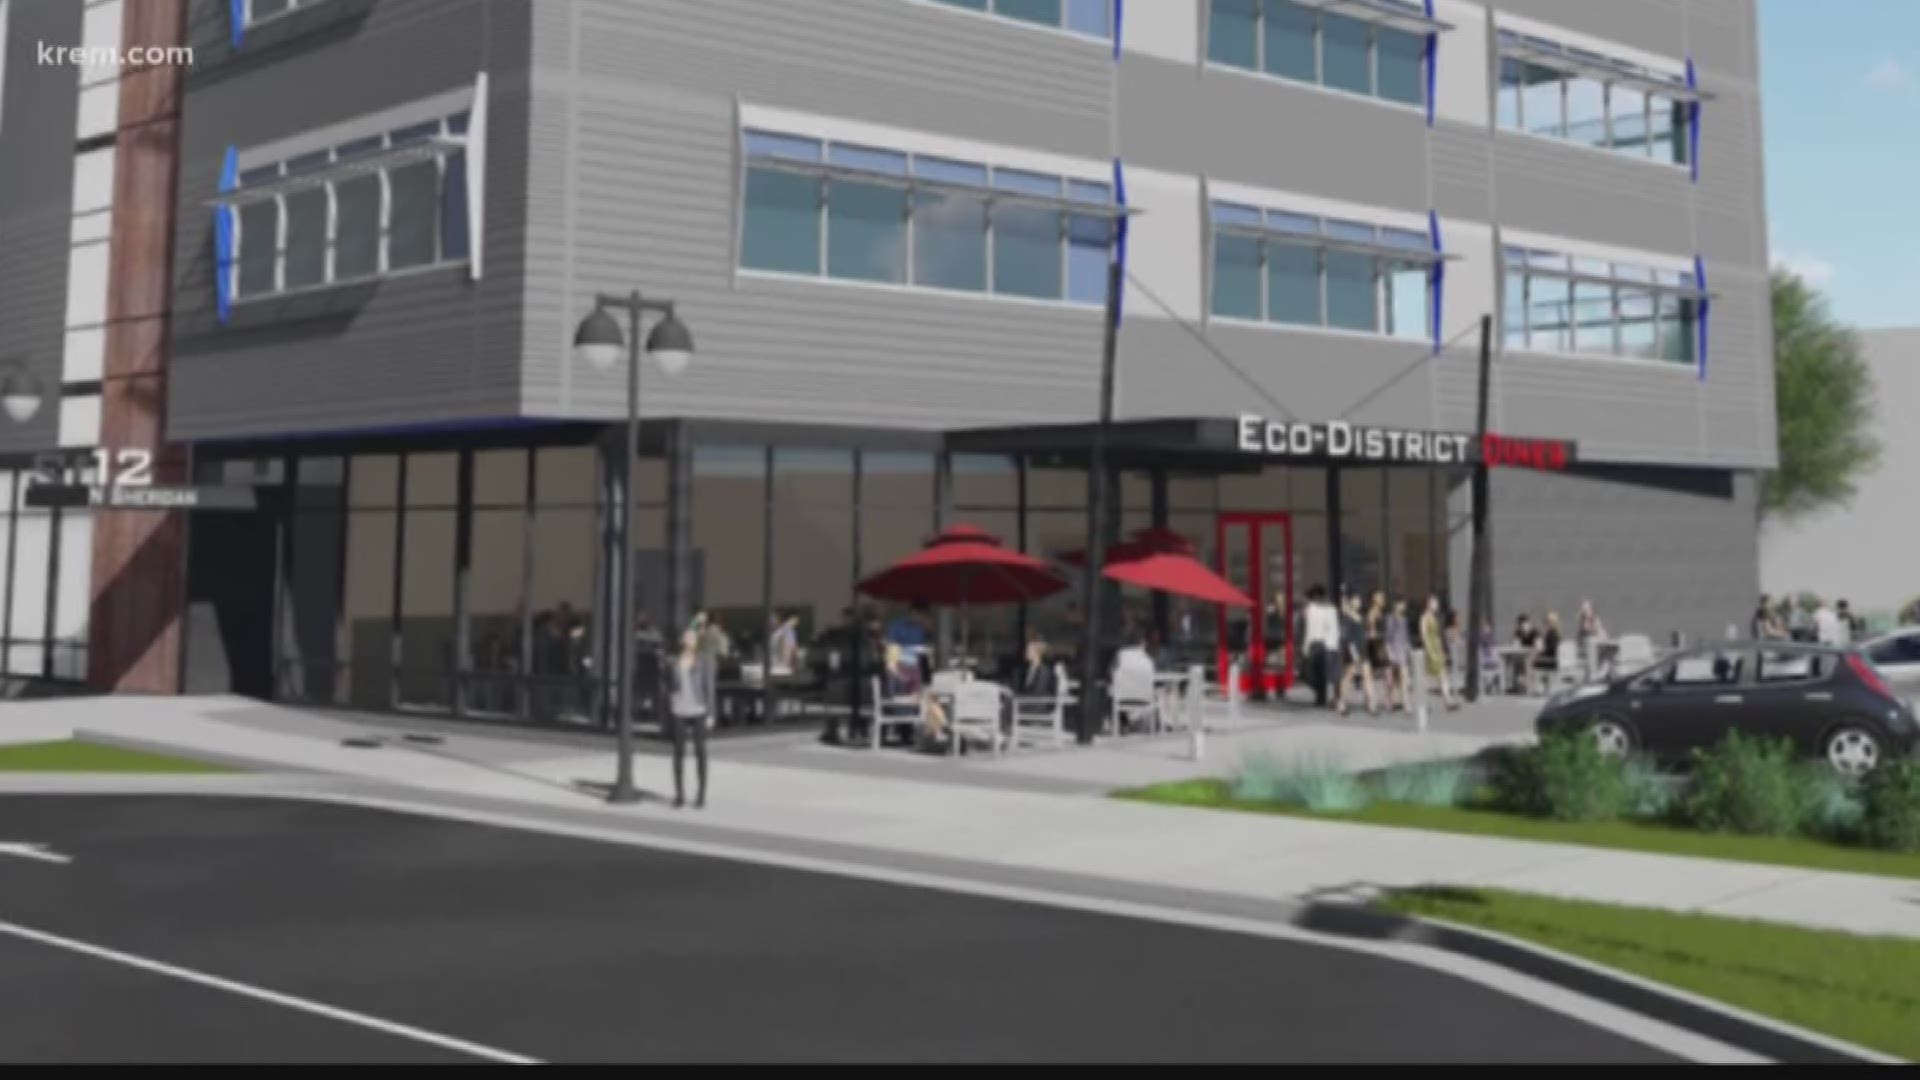 When complete, it will be one of the largest energy saving building in the world and a learning center for a thousand students. Construction on the eco-friendly building in Spokane's U-district is about halfway done.